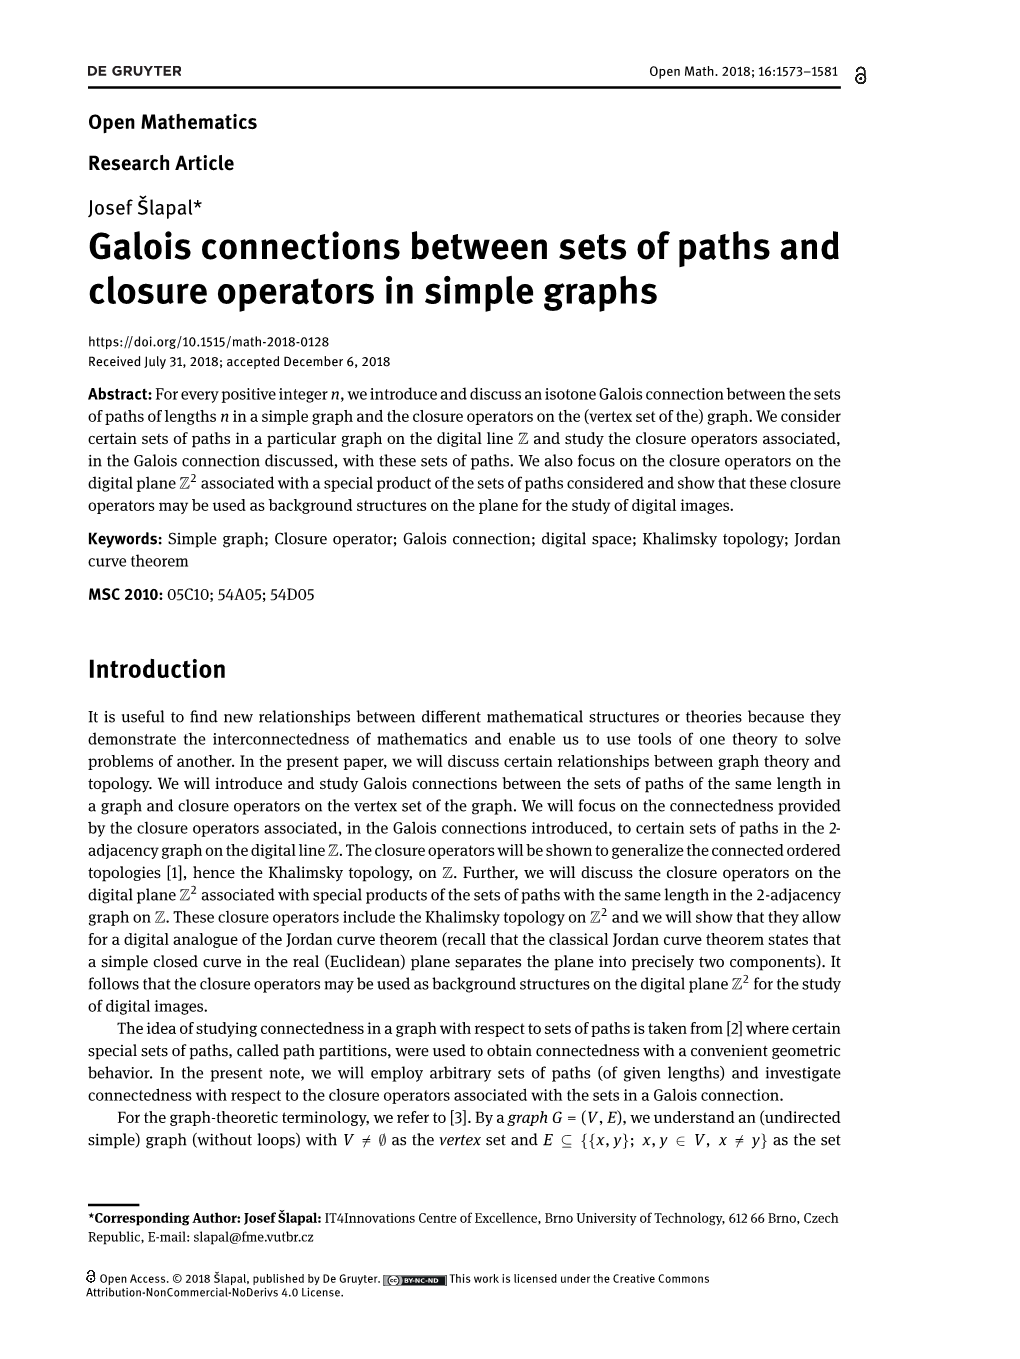 Galois Connections Between Sets of Paths and Closure Operators In